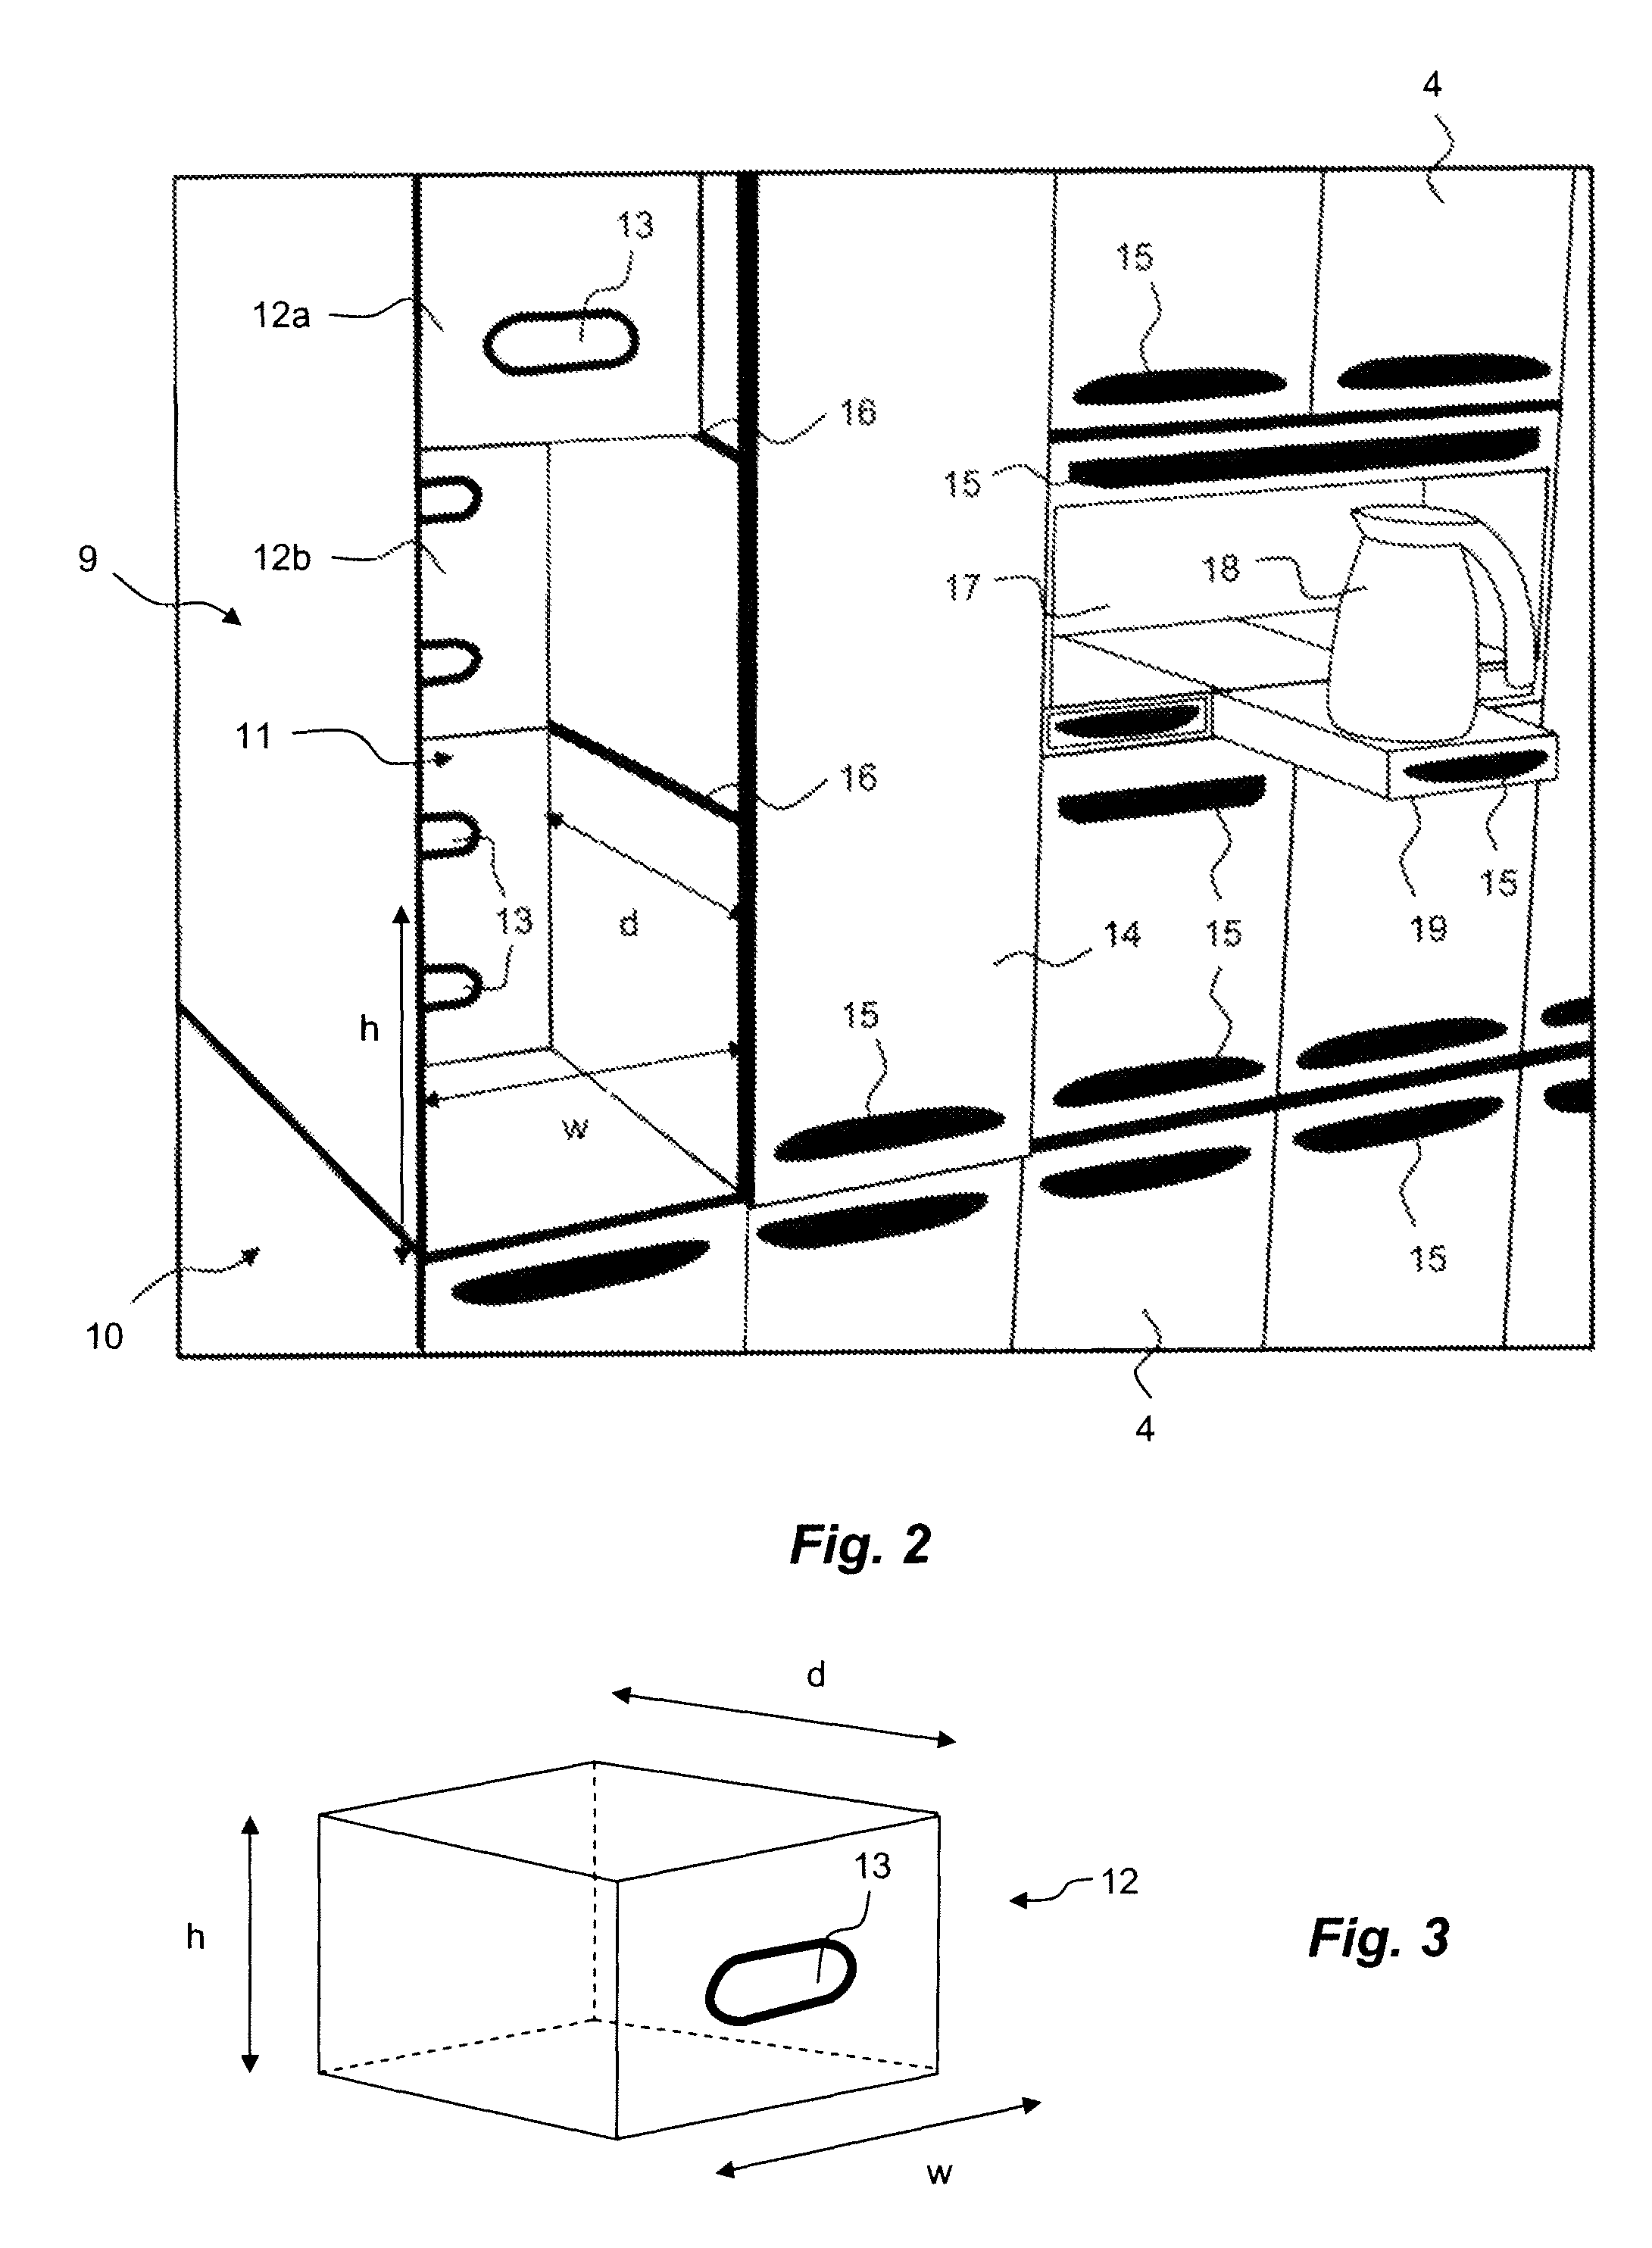 Galley and method of catering for passengers on an aircraft